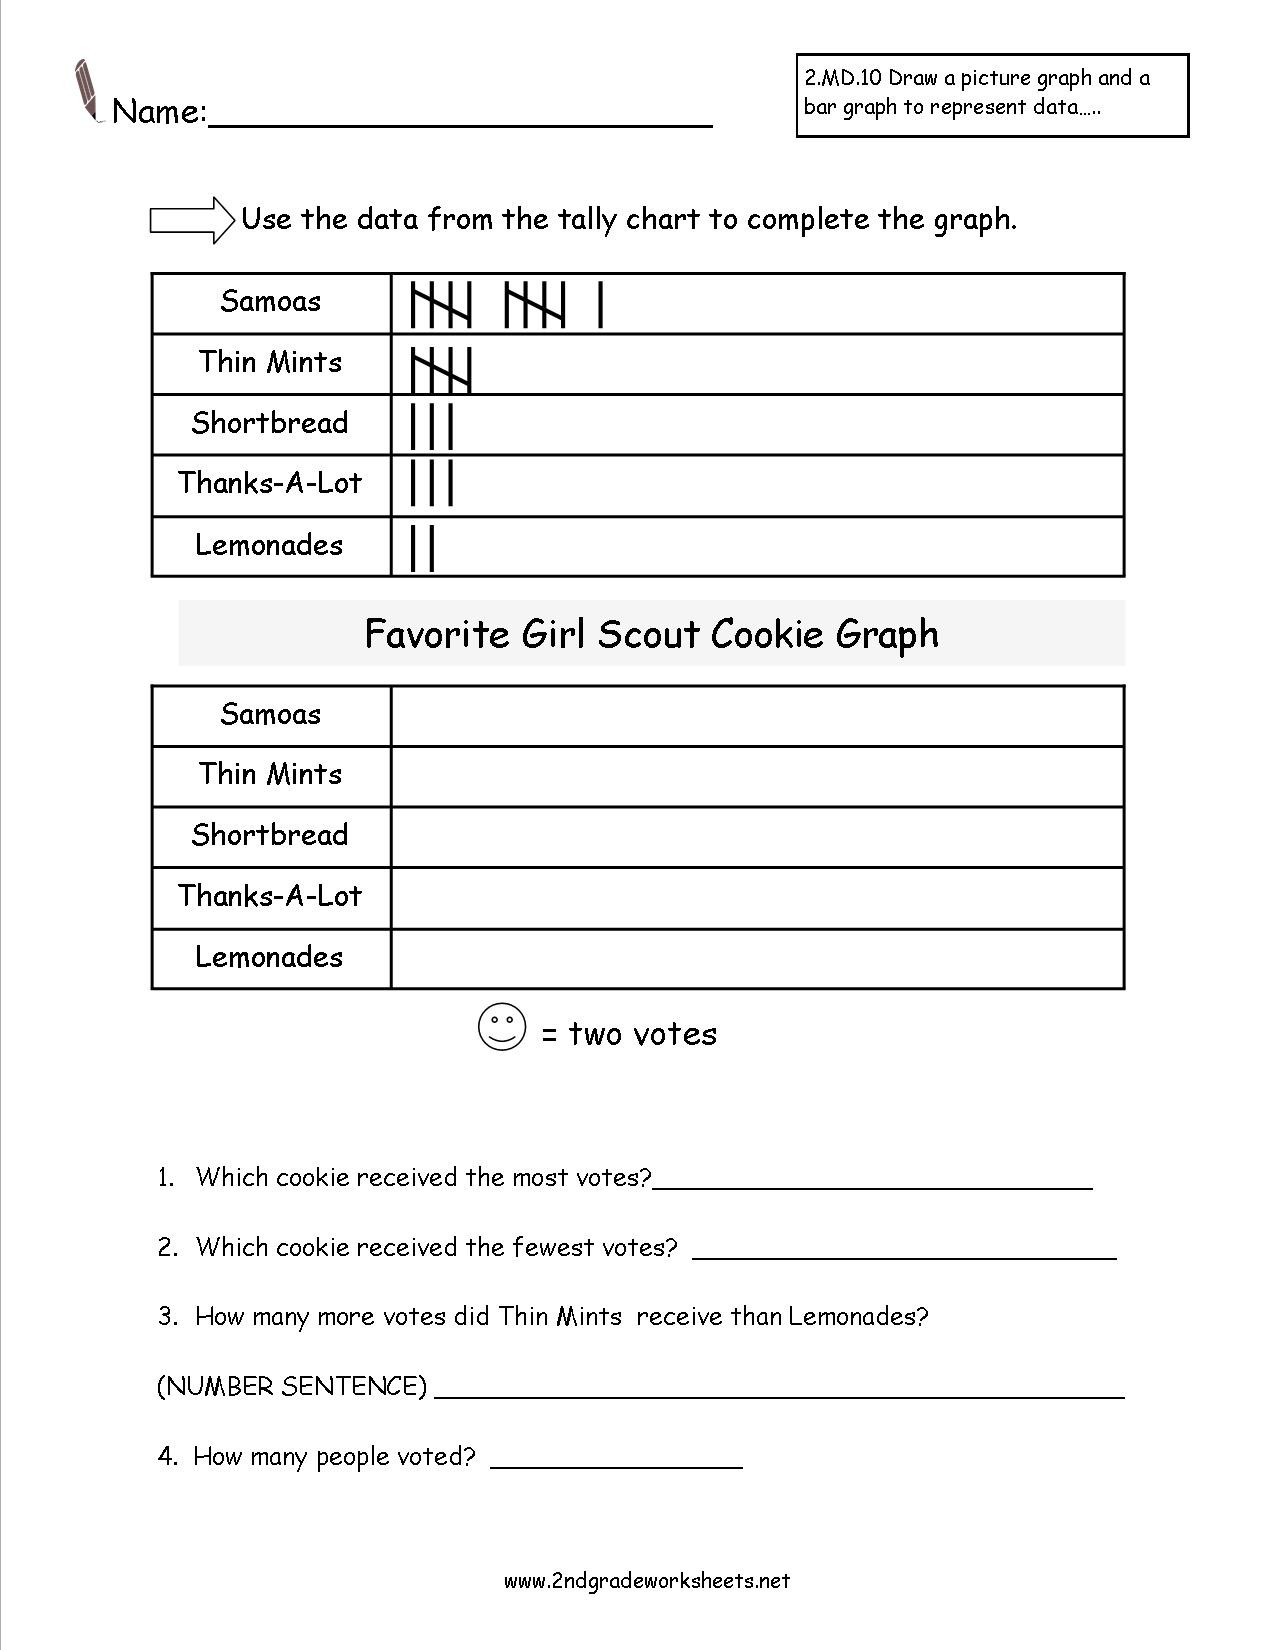 Pictograph Worksheets 3rd Grade Second Grade Reading and Creating Pictograph Worksheets